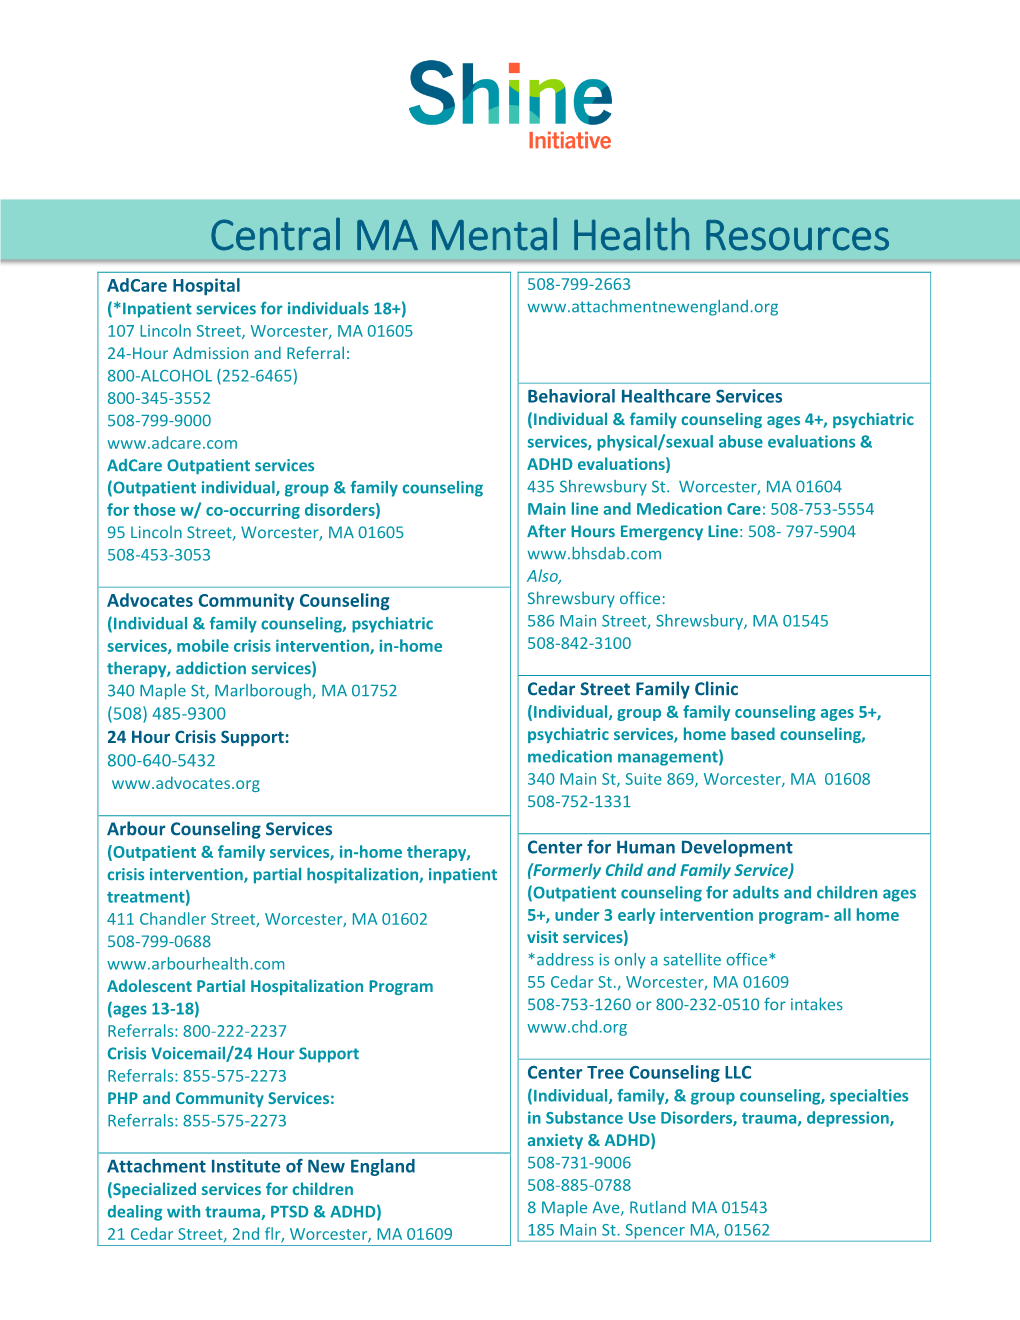 Central MA Mental Health Resources Guide by the Shine